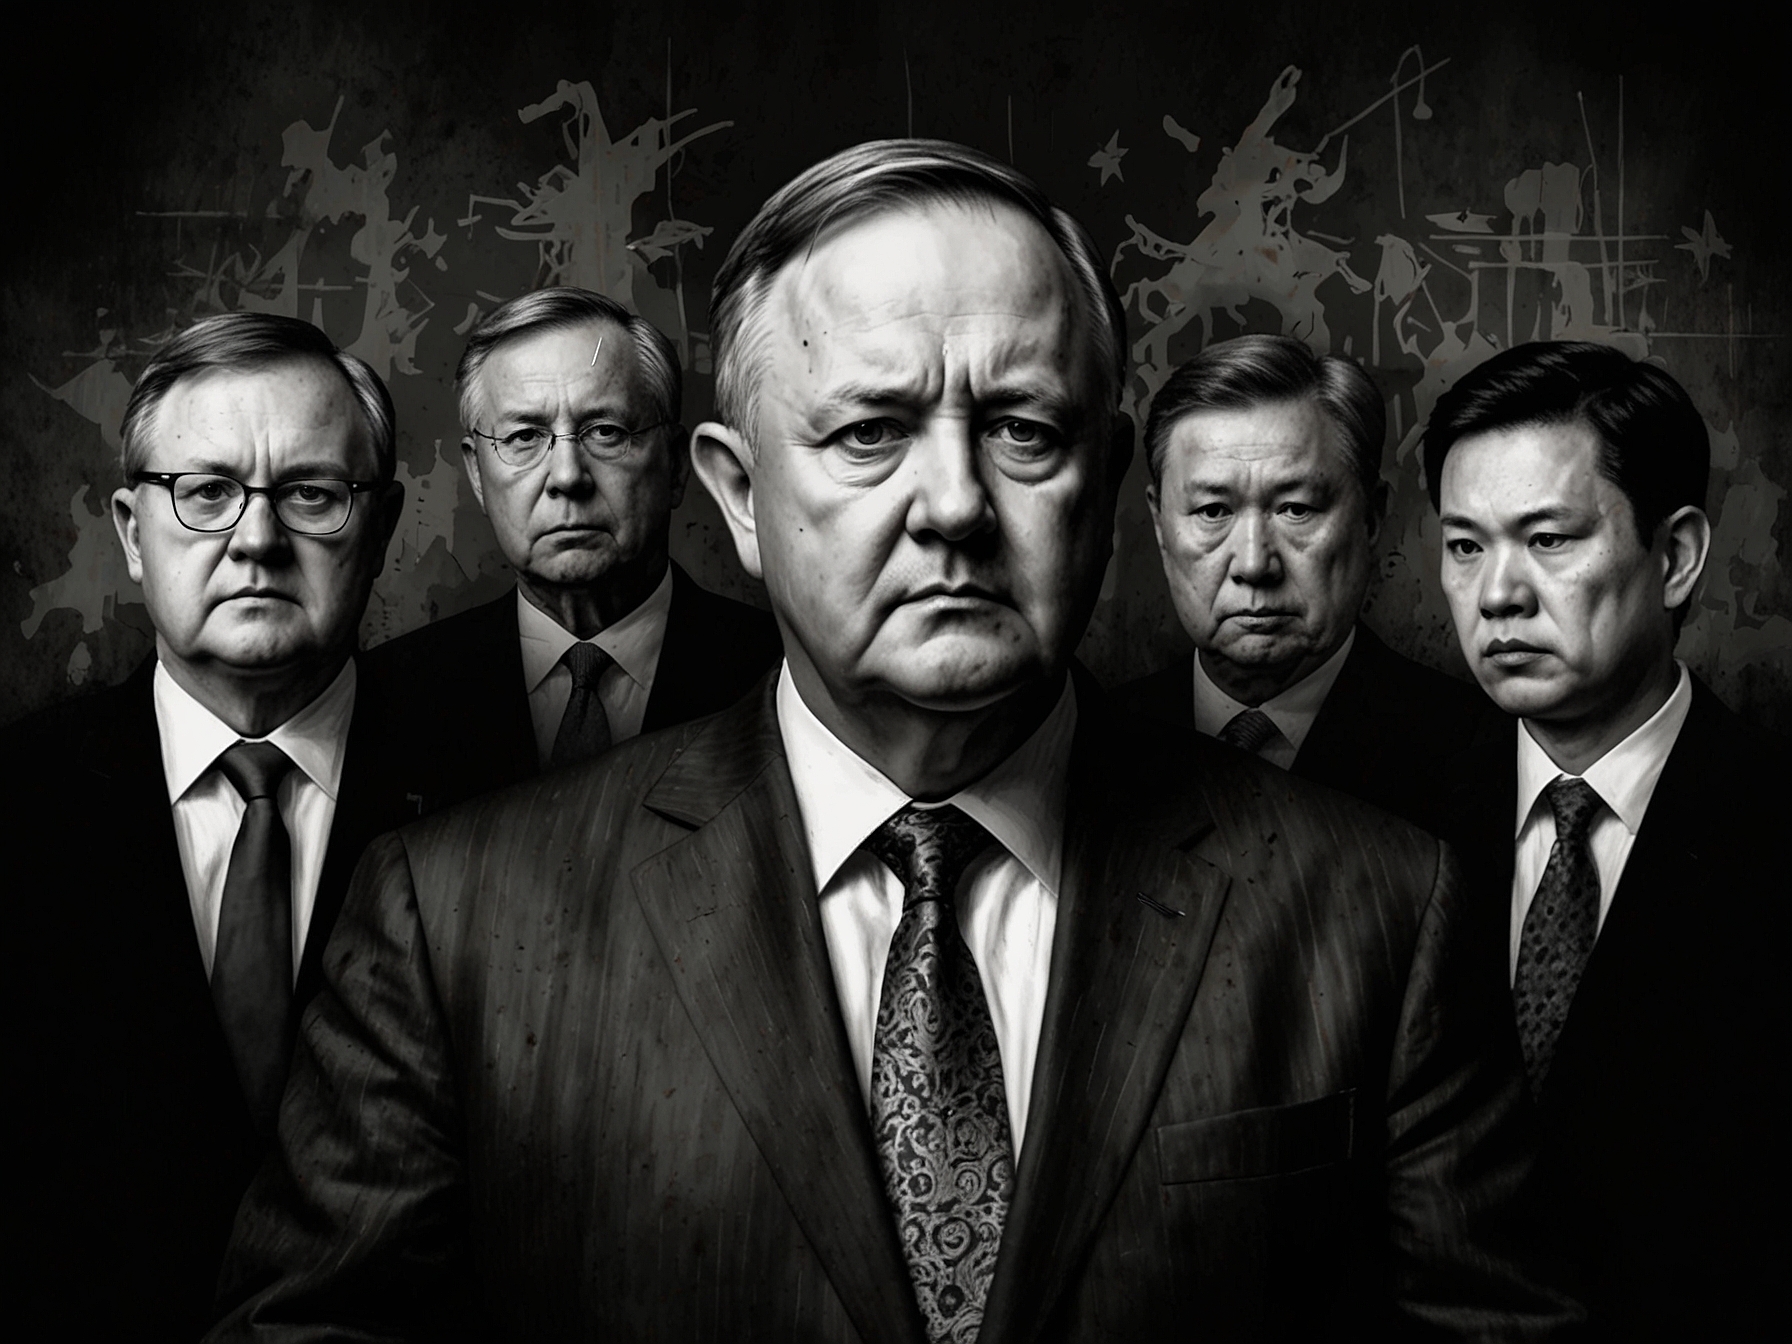 An image showing Prime Minister Anthony Albanese looking puzzled, with shadowy figures representing Chinese interference looming behind him.